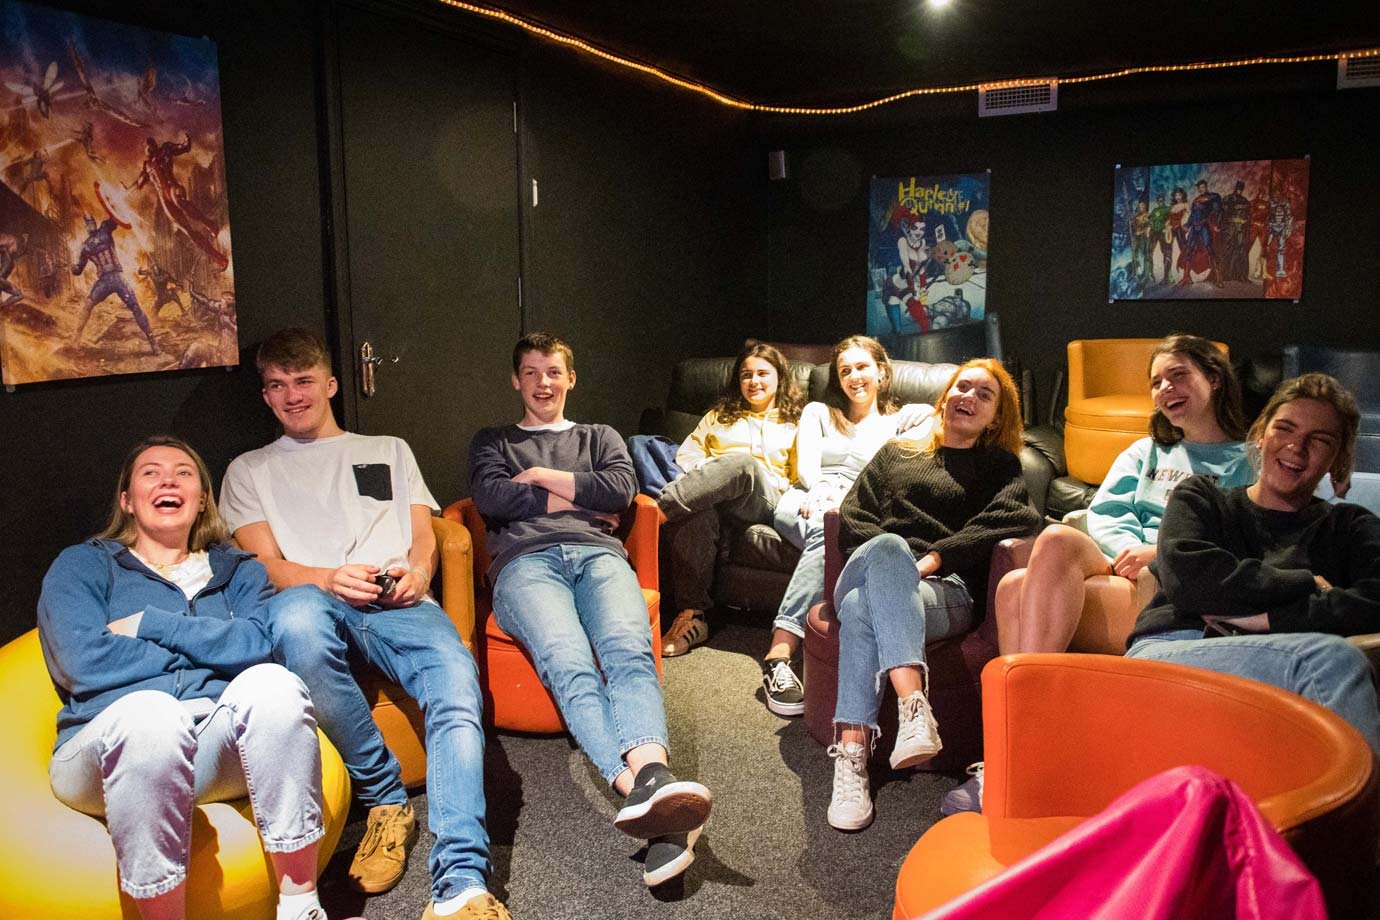 Group of Students in Cinema Room